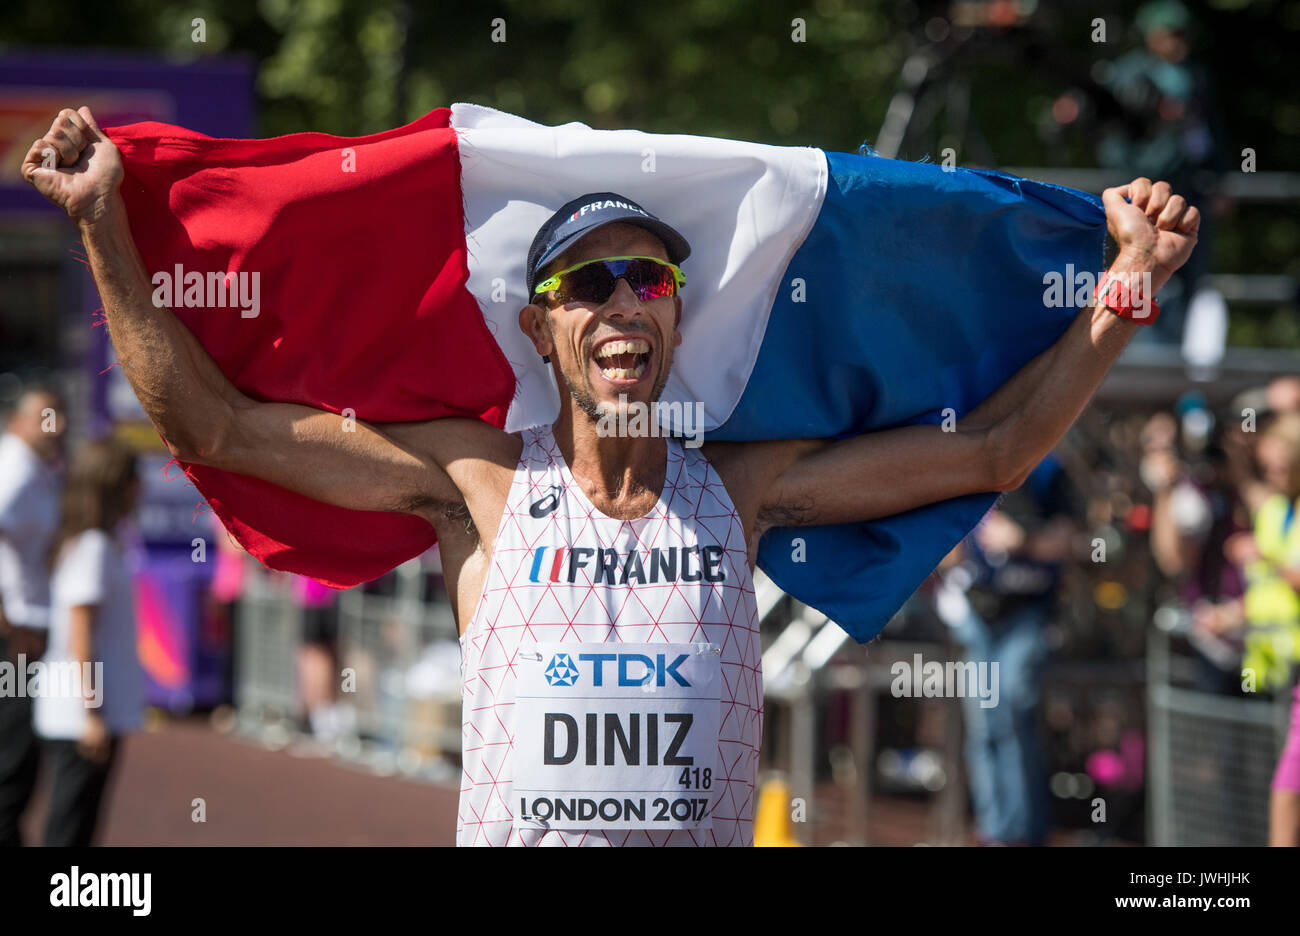 London, UK. 13th Aug, 2017. French athlete Yohann Diniz celebrates after competing in the 50 kilometer marathon at the IAAF London 2017 World Athletics Championships in London, United Kingdom, 13 August 2017. Diniz finished in first place. Photo: Bernd Thissen/dpa/Alamy Live News Stock Photo